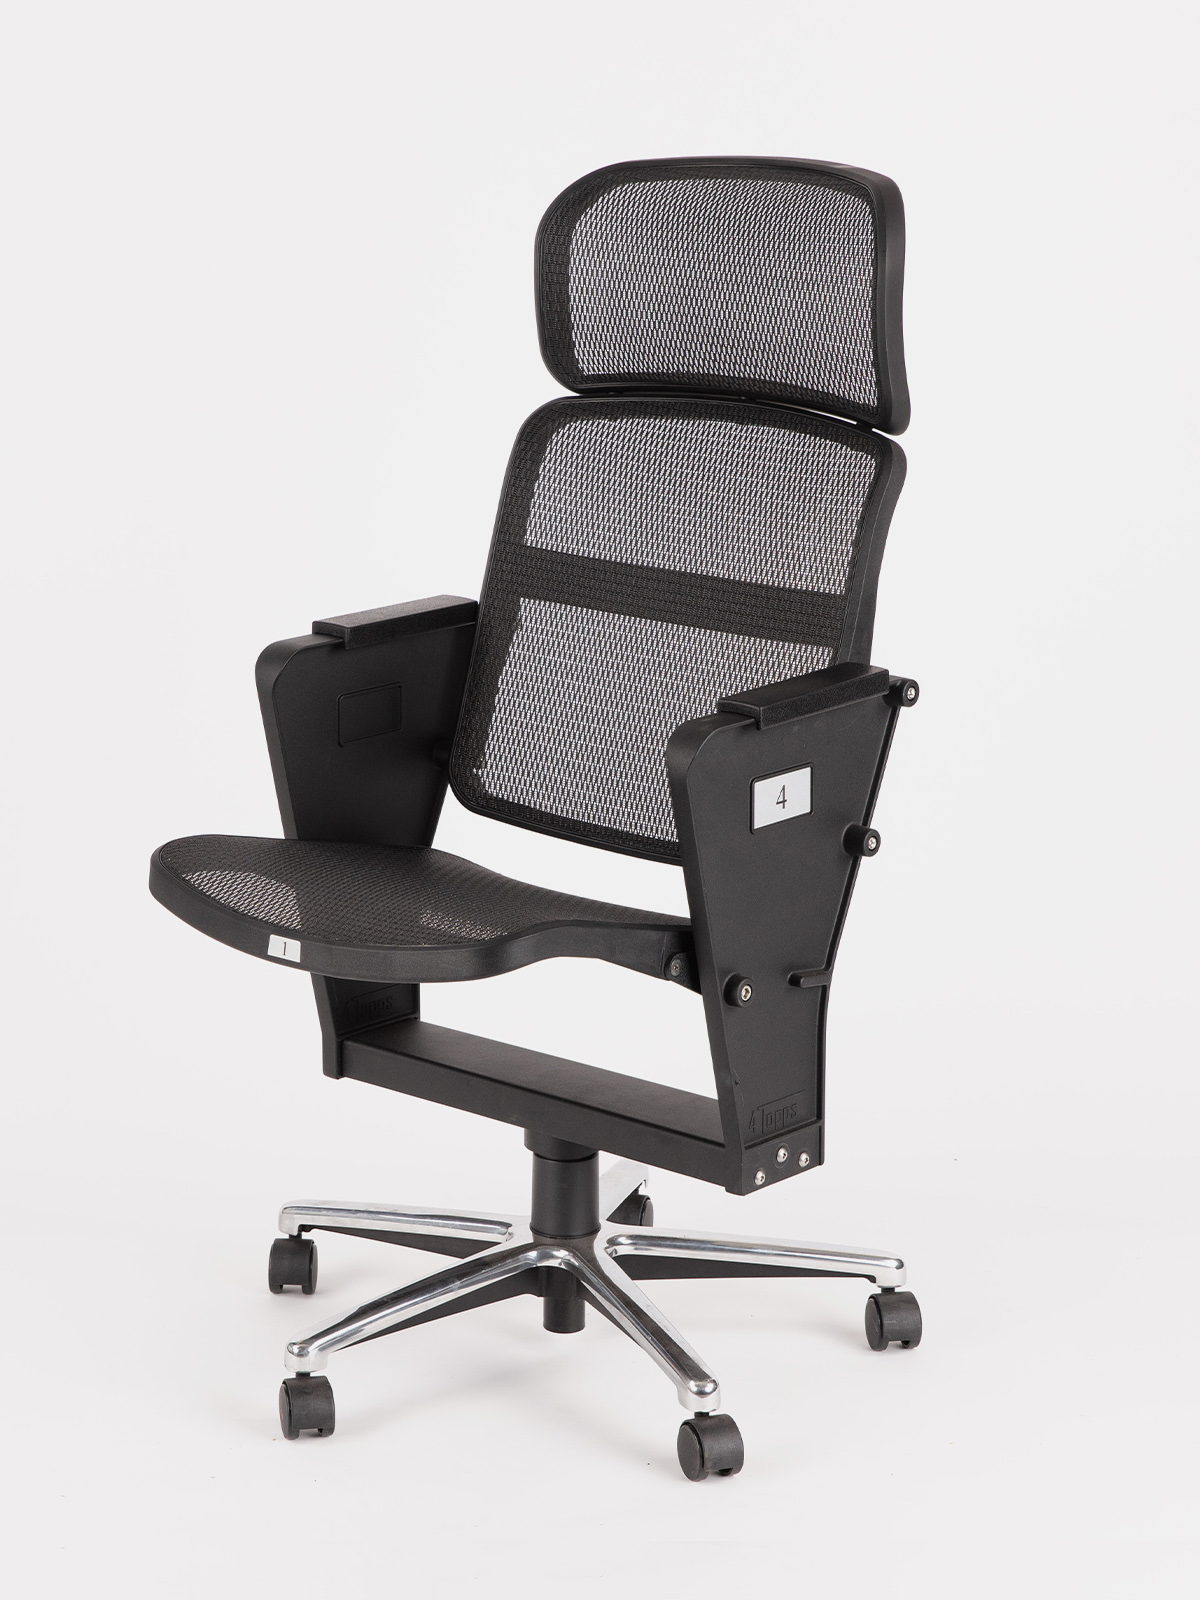 Silver 4Topps Caster Suite Seat on white background